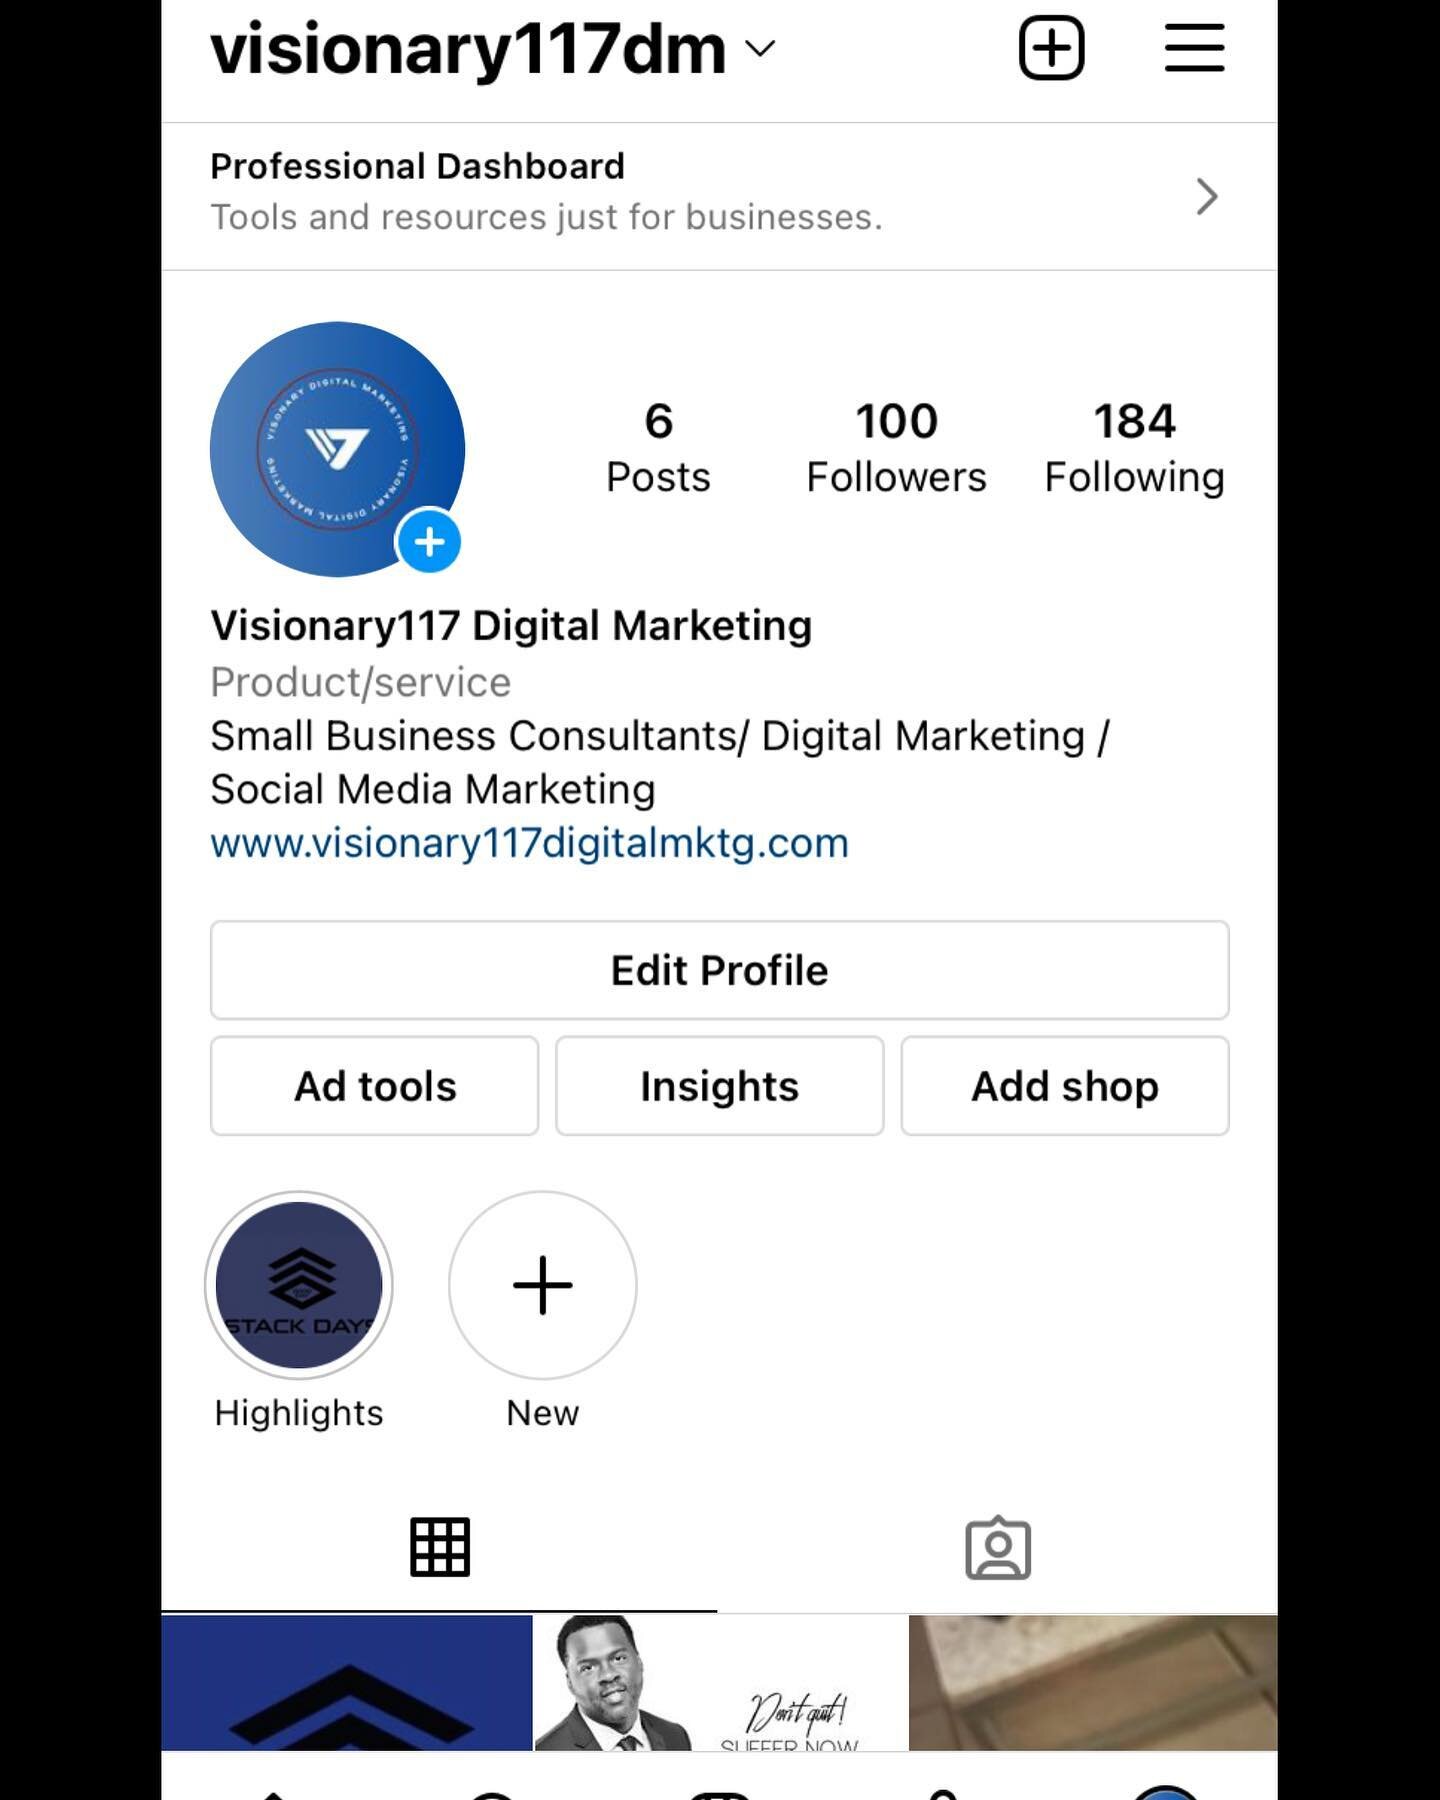 Thanks for following me!! 100 followers, I appreciate each &amp; every 1. Prepare for a relaunch coming some!! Had a few setbacks but we are coming for the crown!!! 
.
.
.
.
.
.

#smallbusinessowner #baltimorebusiness #digitalmarketing